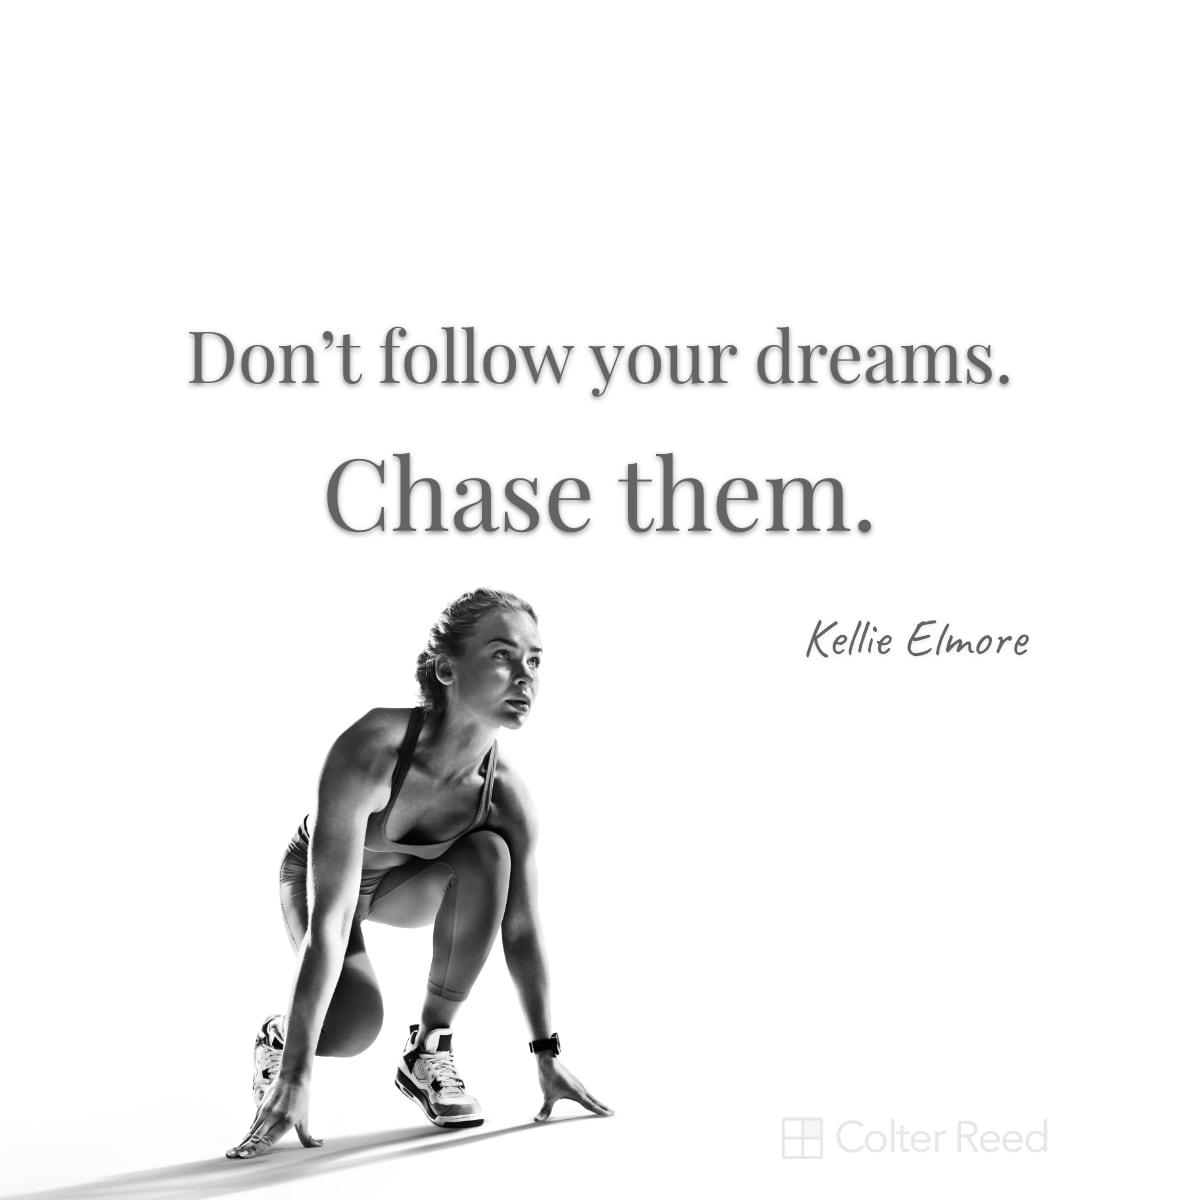 Don’t follow your dreams. Chase them. —Kellie Elmore